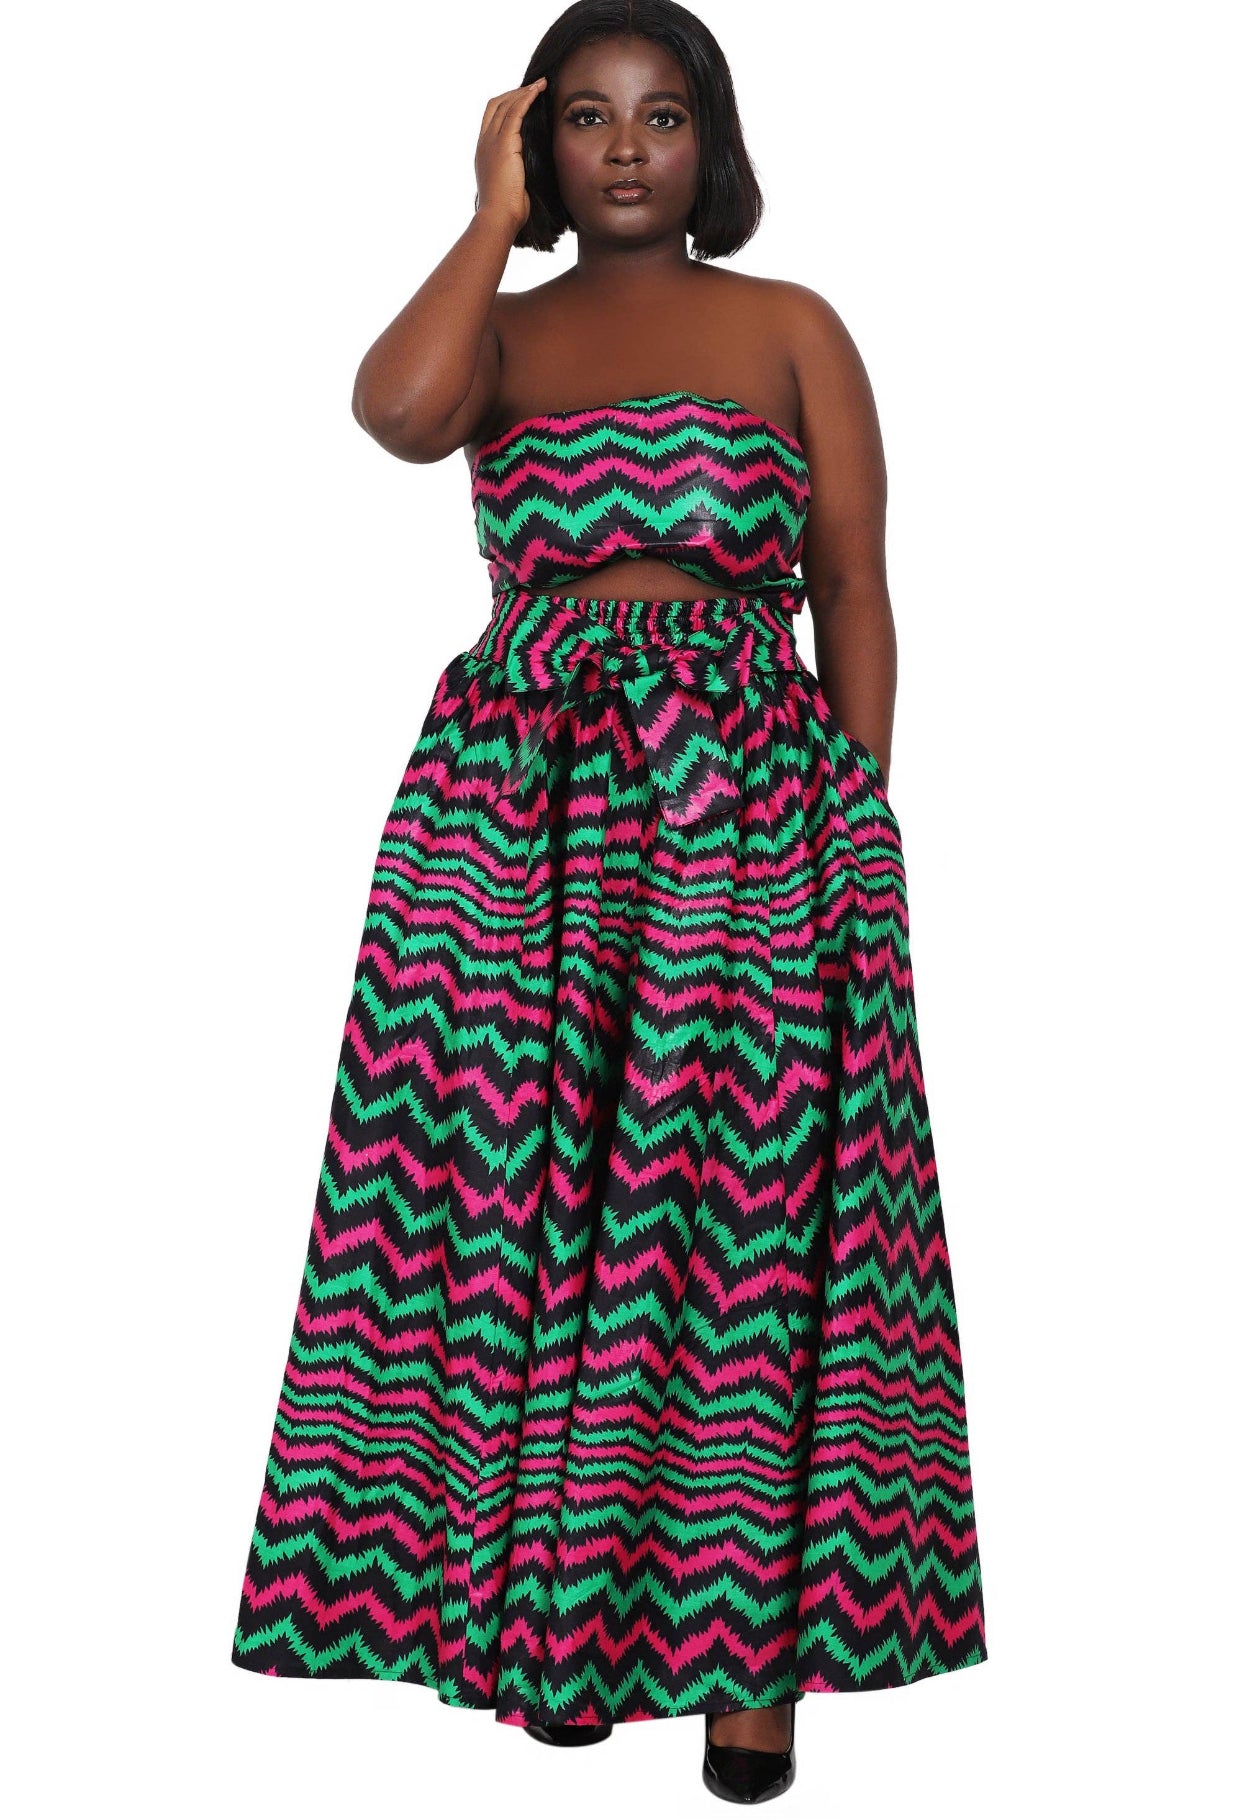 Hand Made African Print Full Skirt with Coordinating Head Wrap and FaceMask  (Magenta, Green, Black)